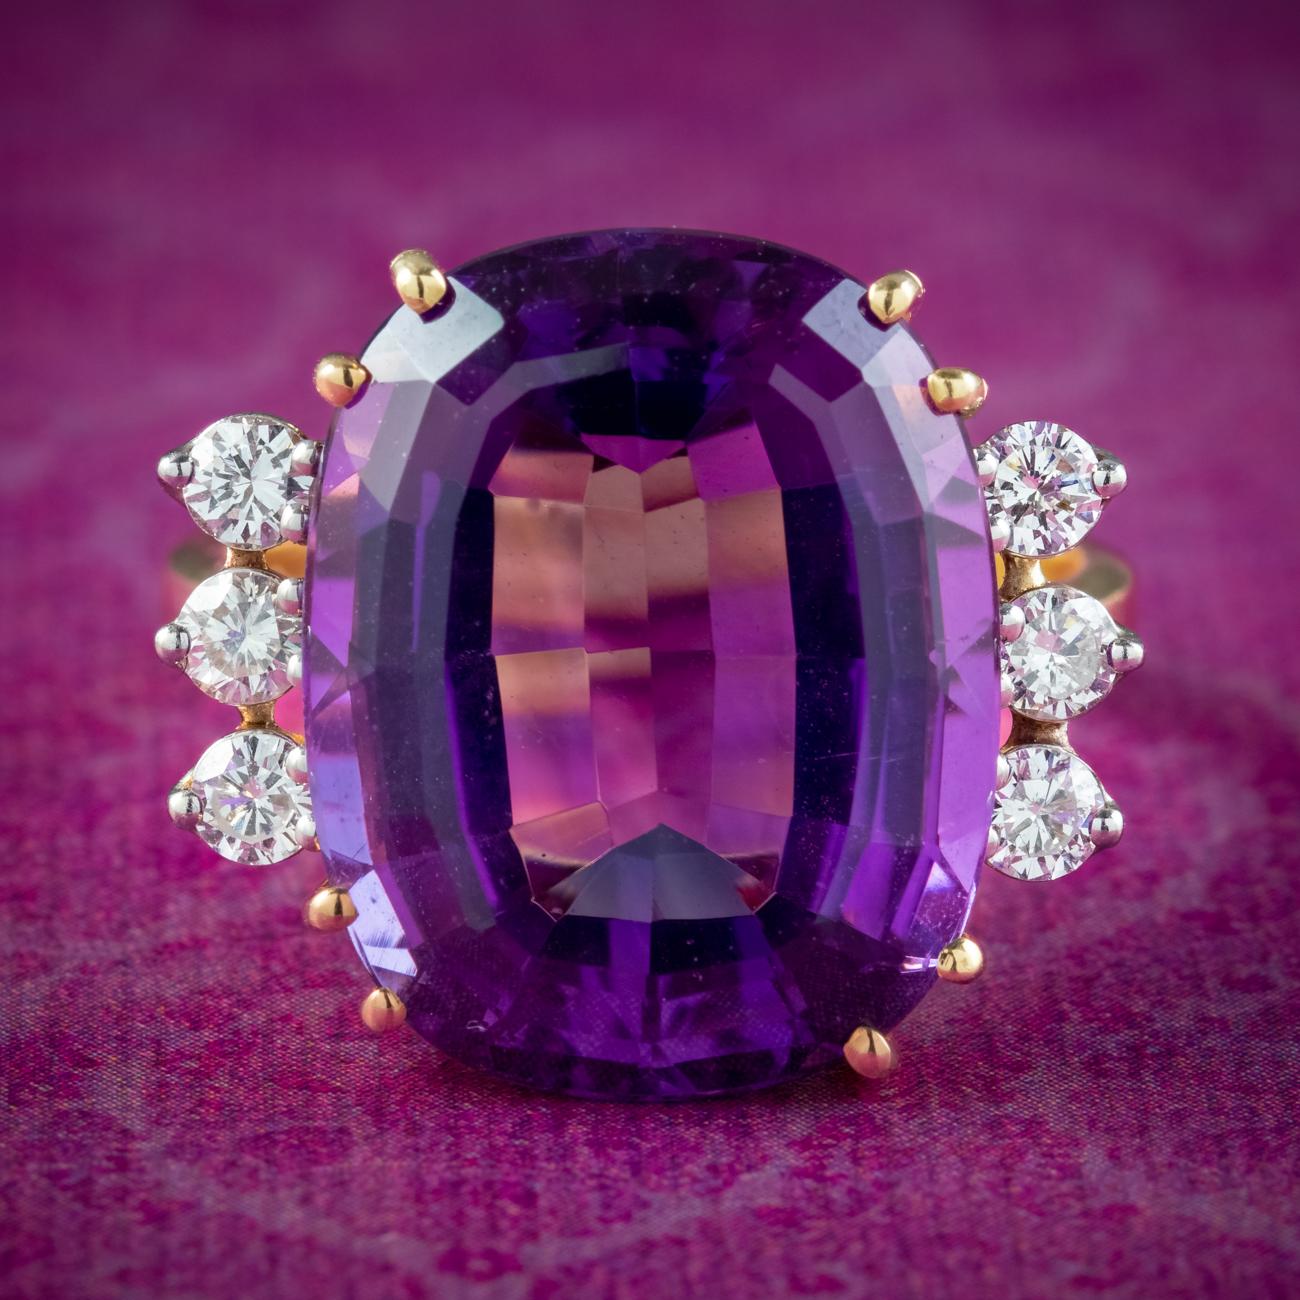 Boasting an enormous cushion cut amethyst, this spectacular mid-Century cocktail ring was made to be seen! The amethyst weighs approx. 16 carats and has a luxurious, deep purple hue and an array of glistening facets, complemented beautifully by